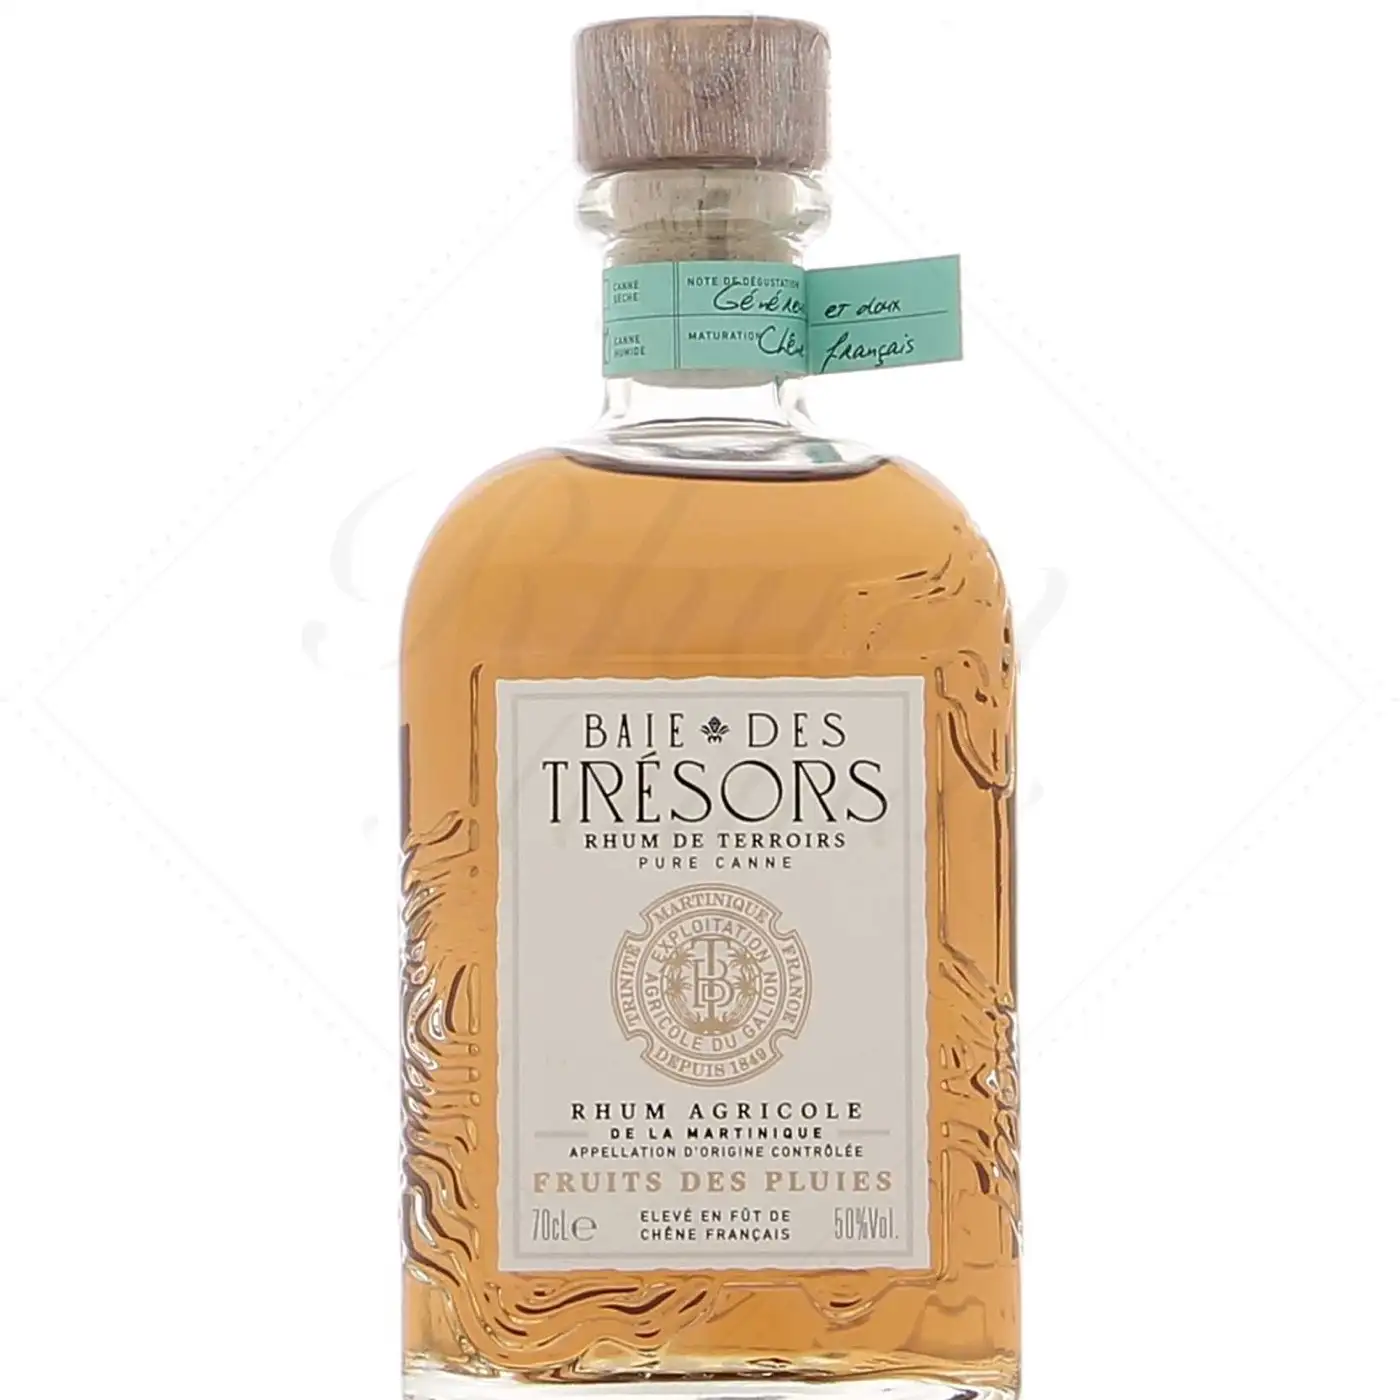 Image of the front of the bottle of the rum Fruits des Pluies